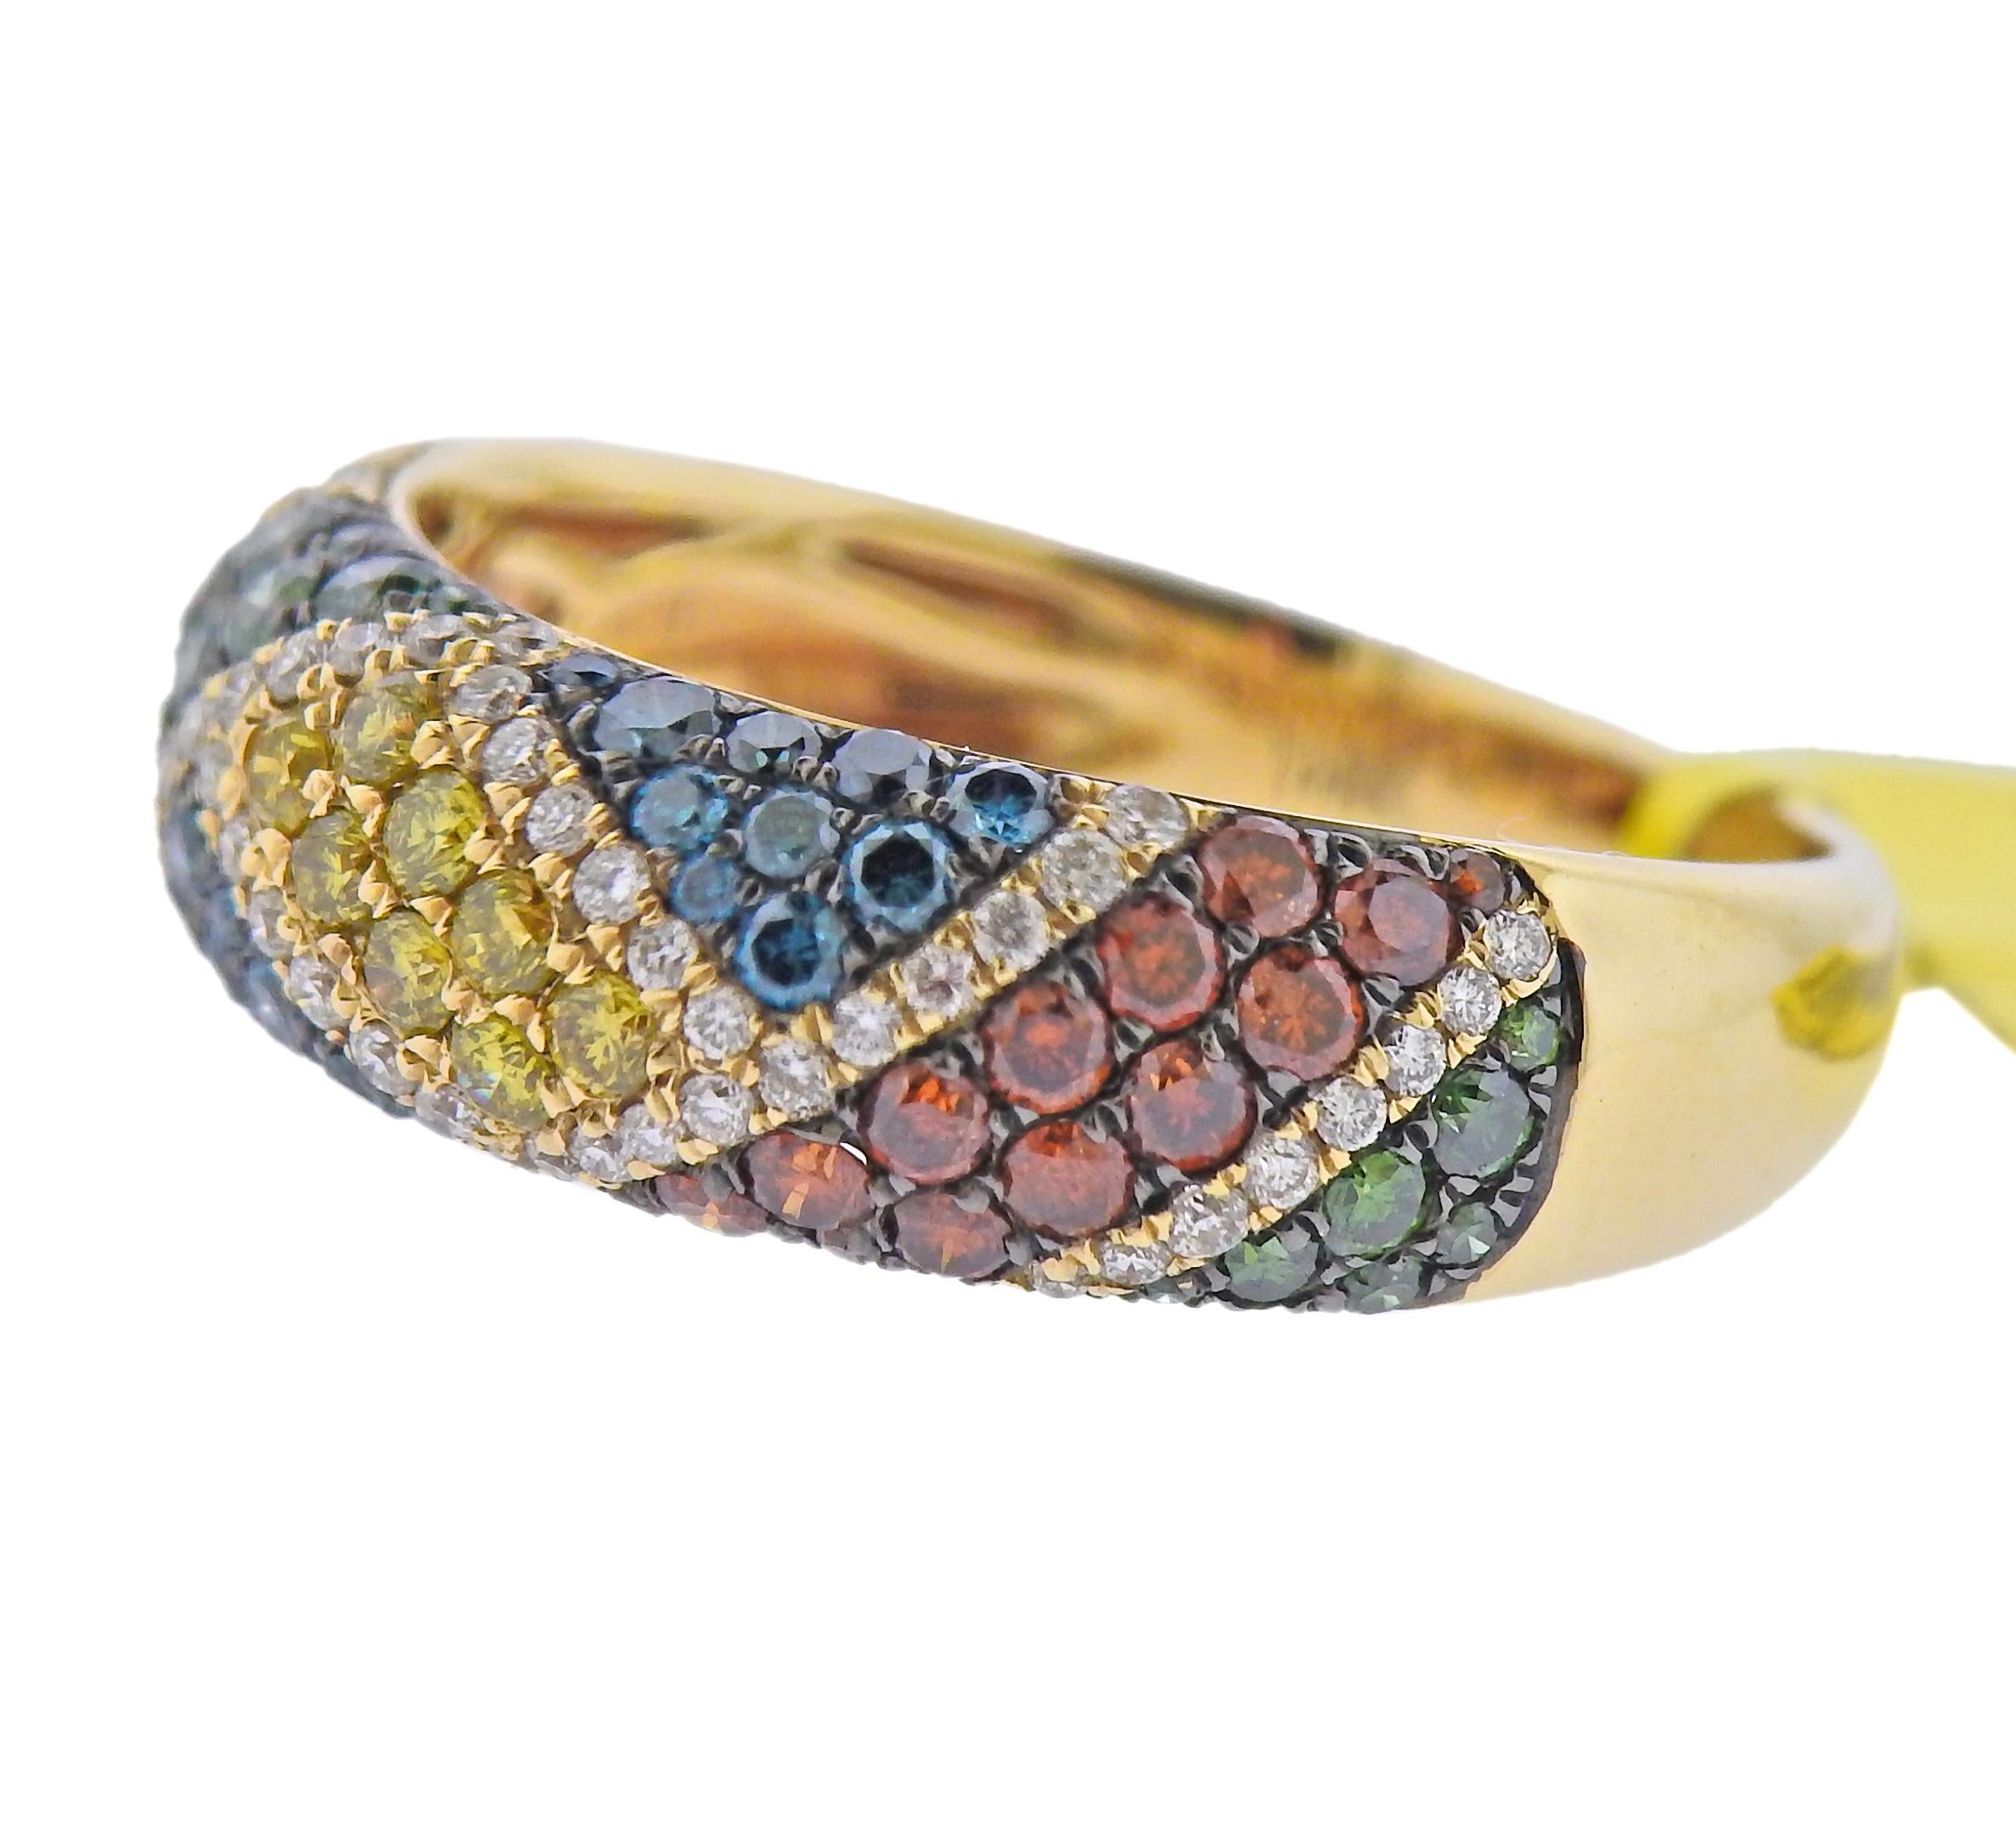 New Le Vian 14k gold ring with multi color diamonds  - 1.04ctw. Retail $8395. Comes with pouch.  Ring size - 7, ring top is 6.5mm wide. Weight - 3.4 grams. Marked: 14k, Le Vian mark.